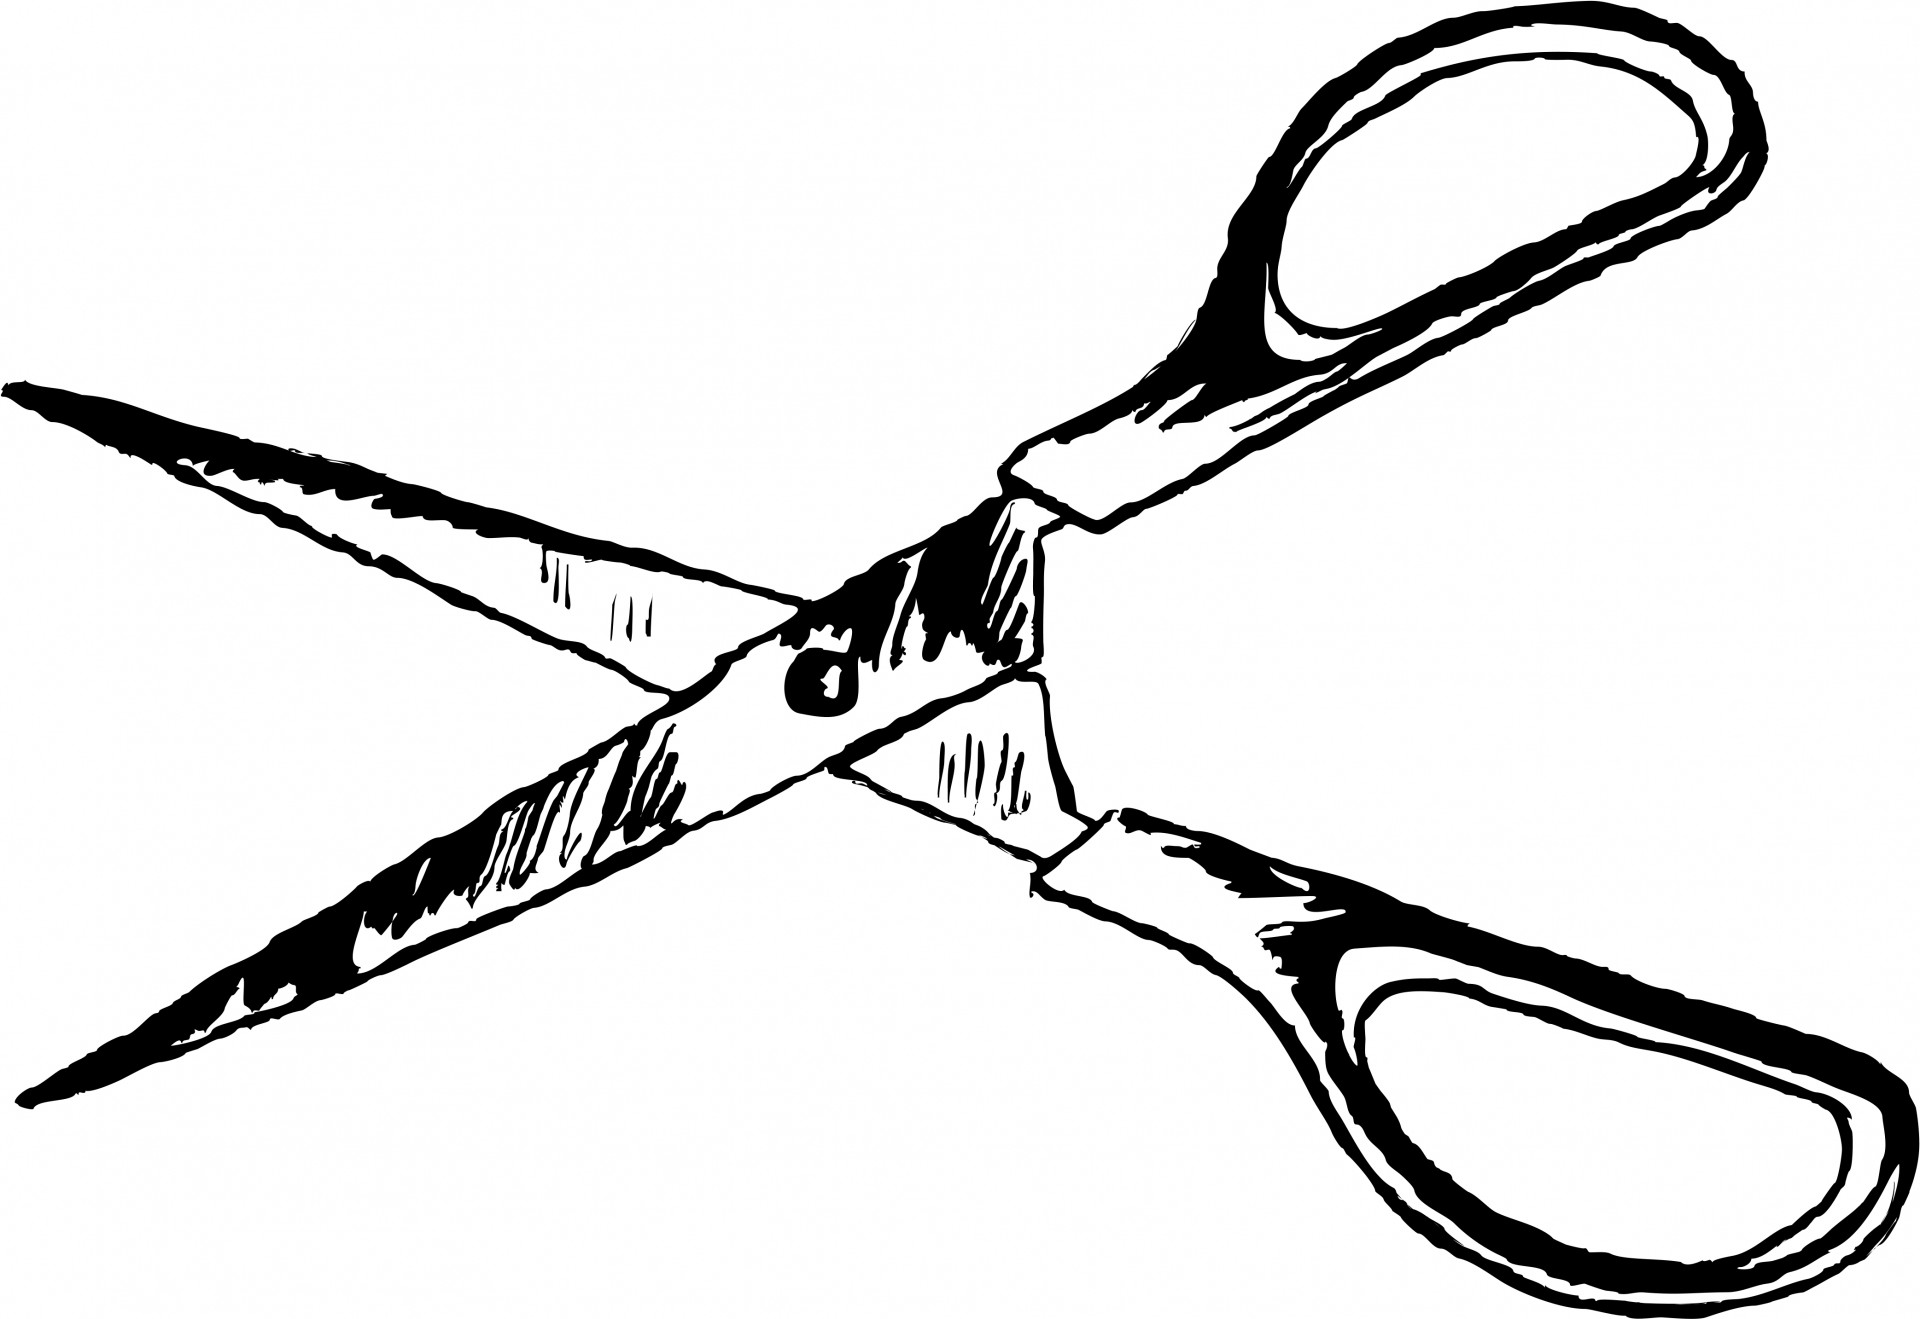 Scissors clipart black and white free clipart images 3 ...